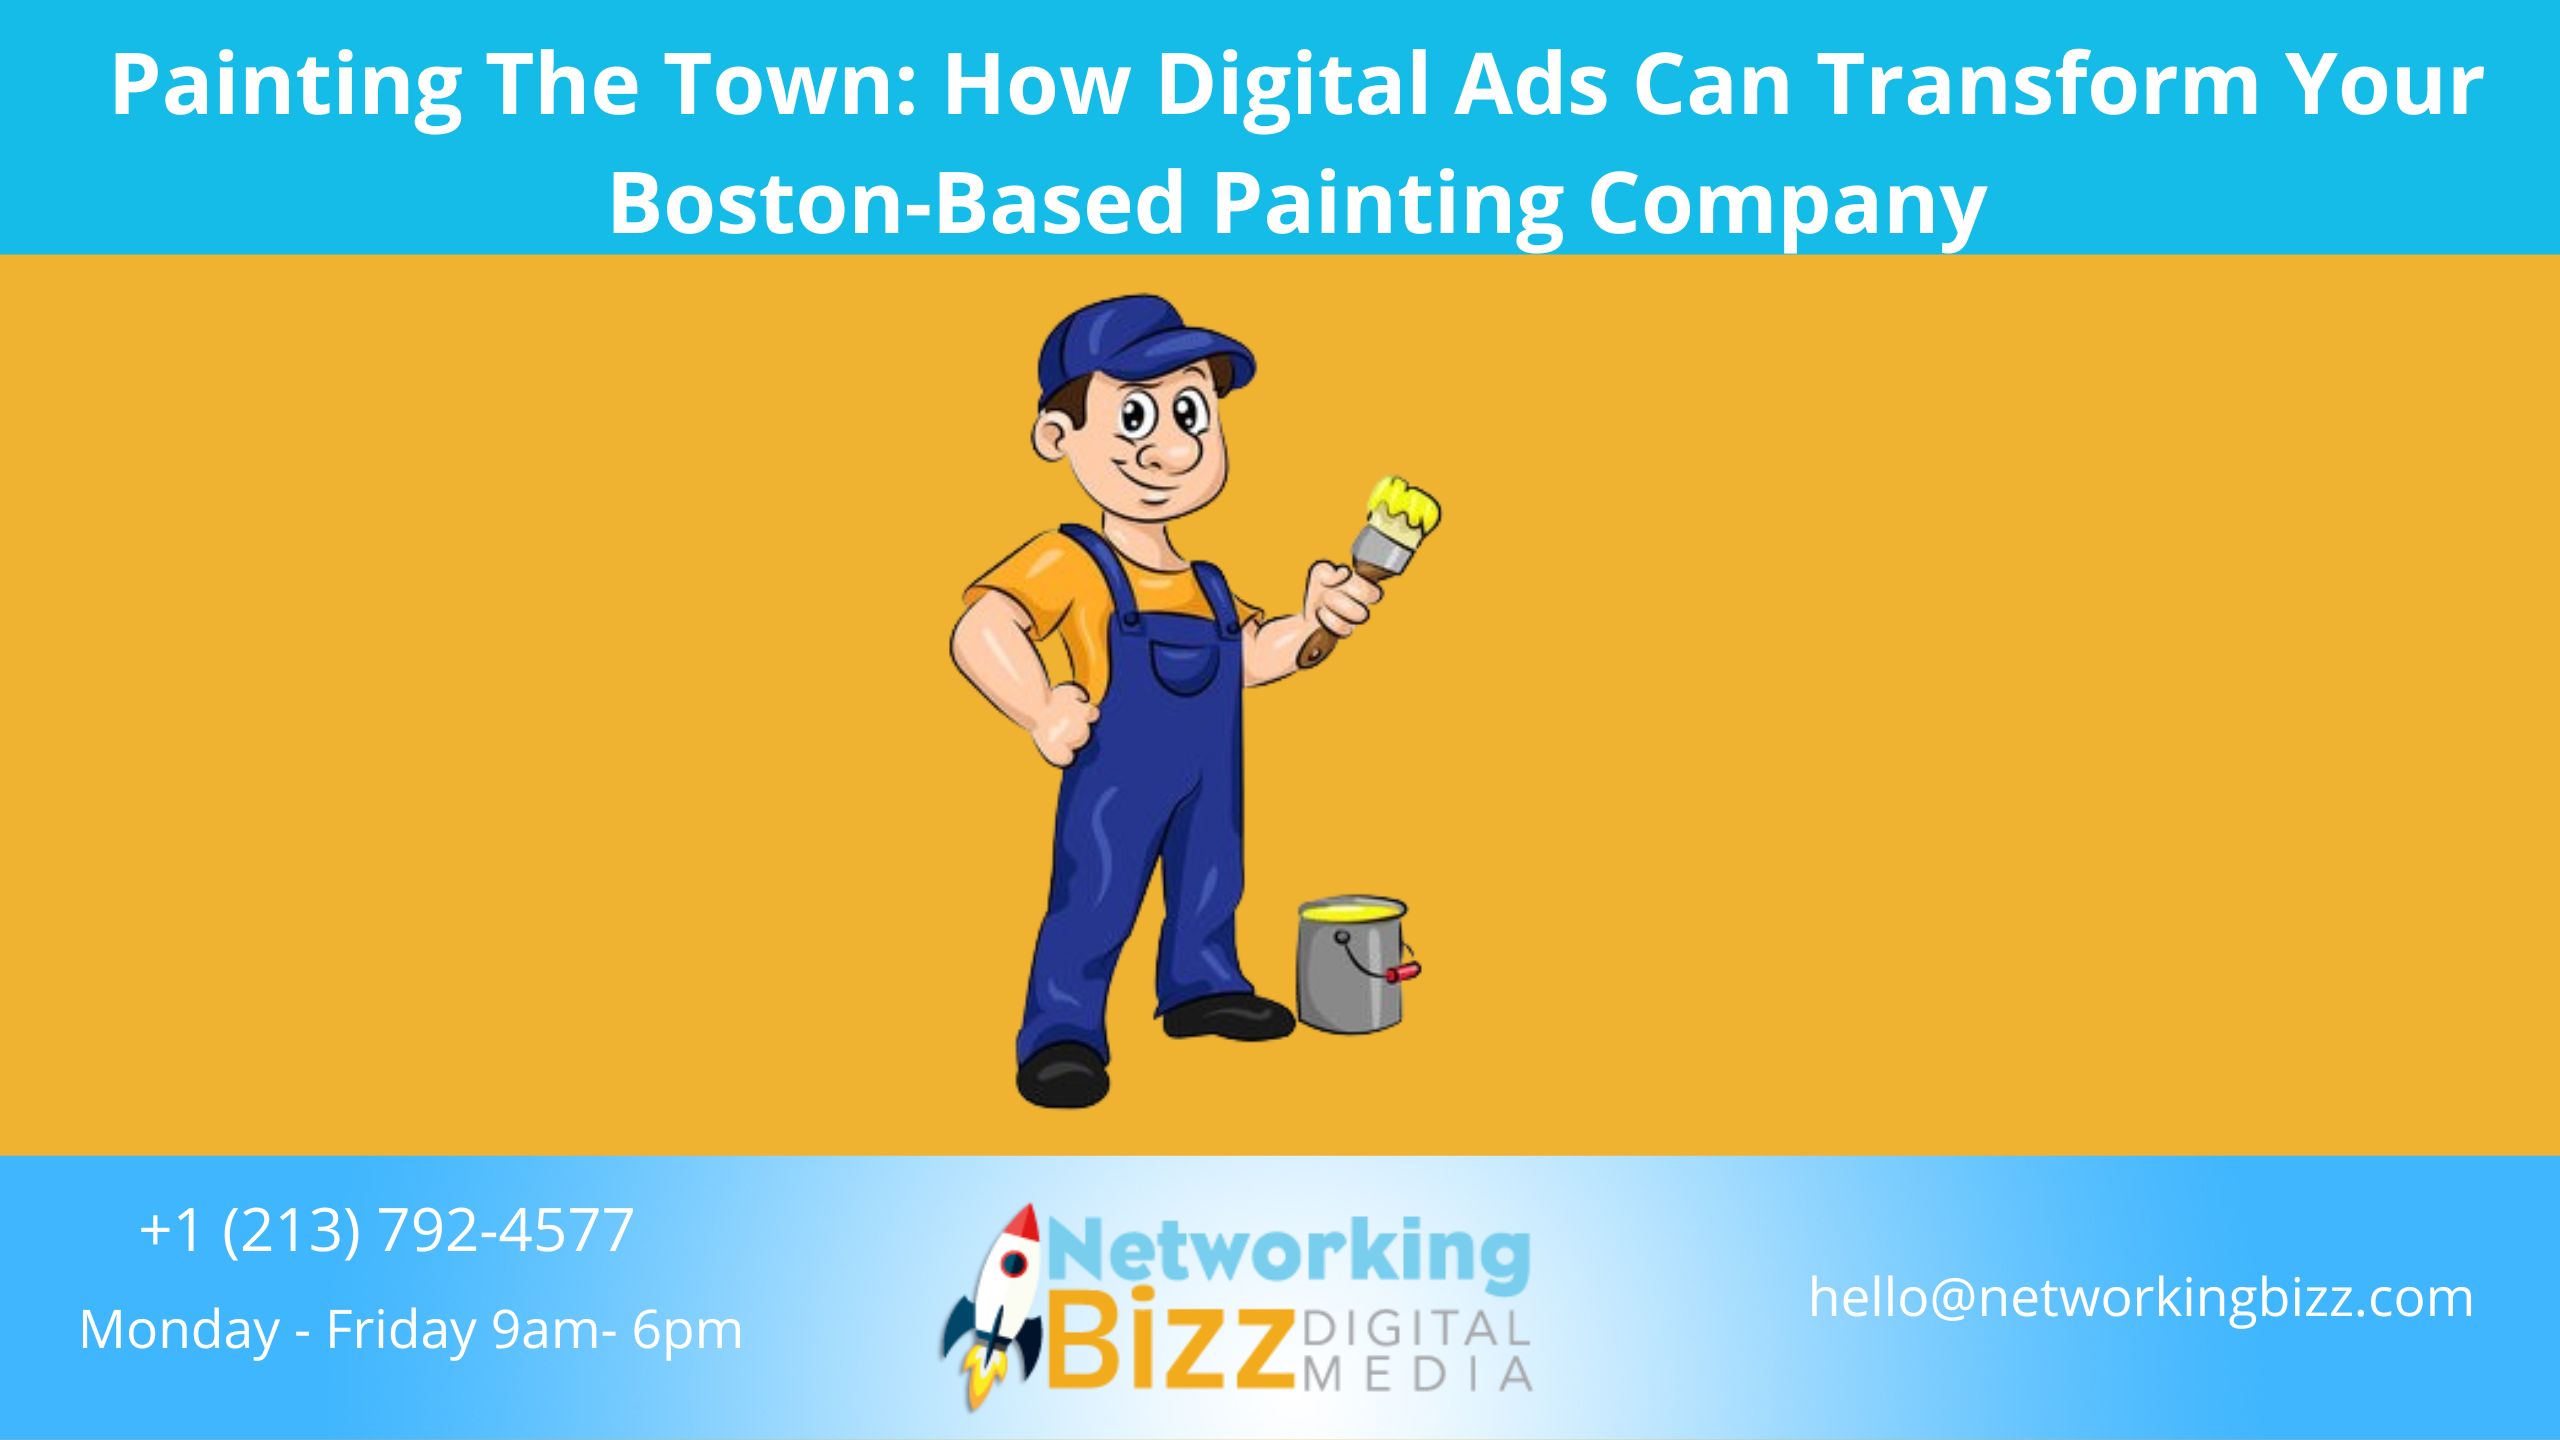 Painting The Town: How Digital Ads Can Transform Your Boston-Based Painting Company